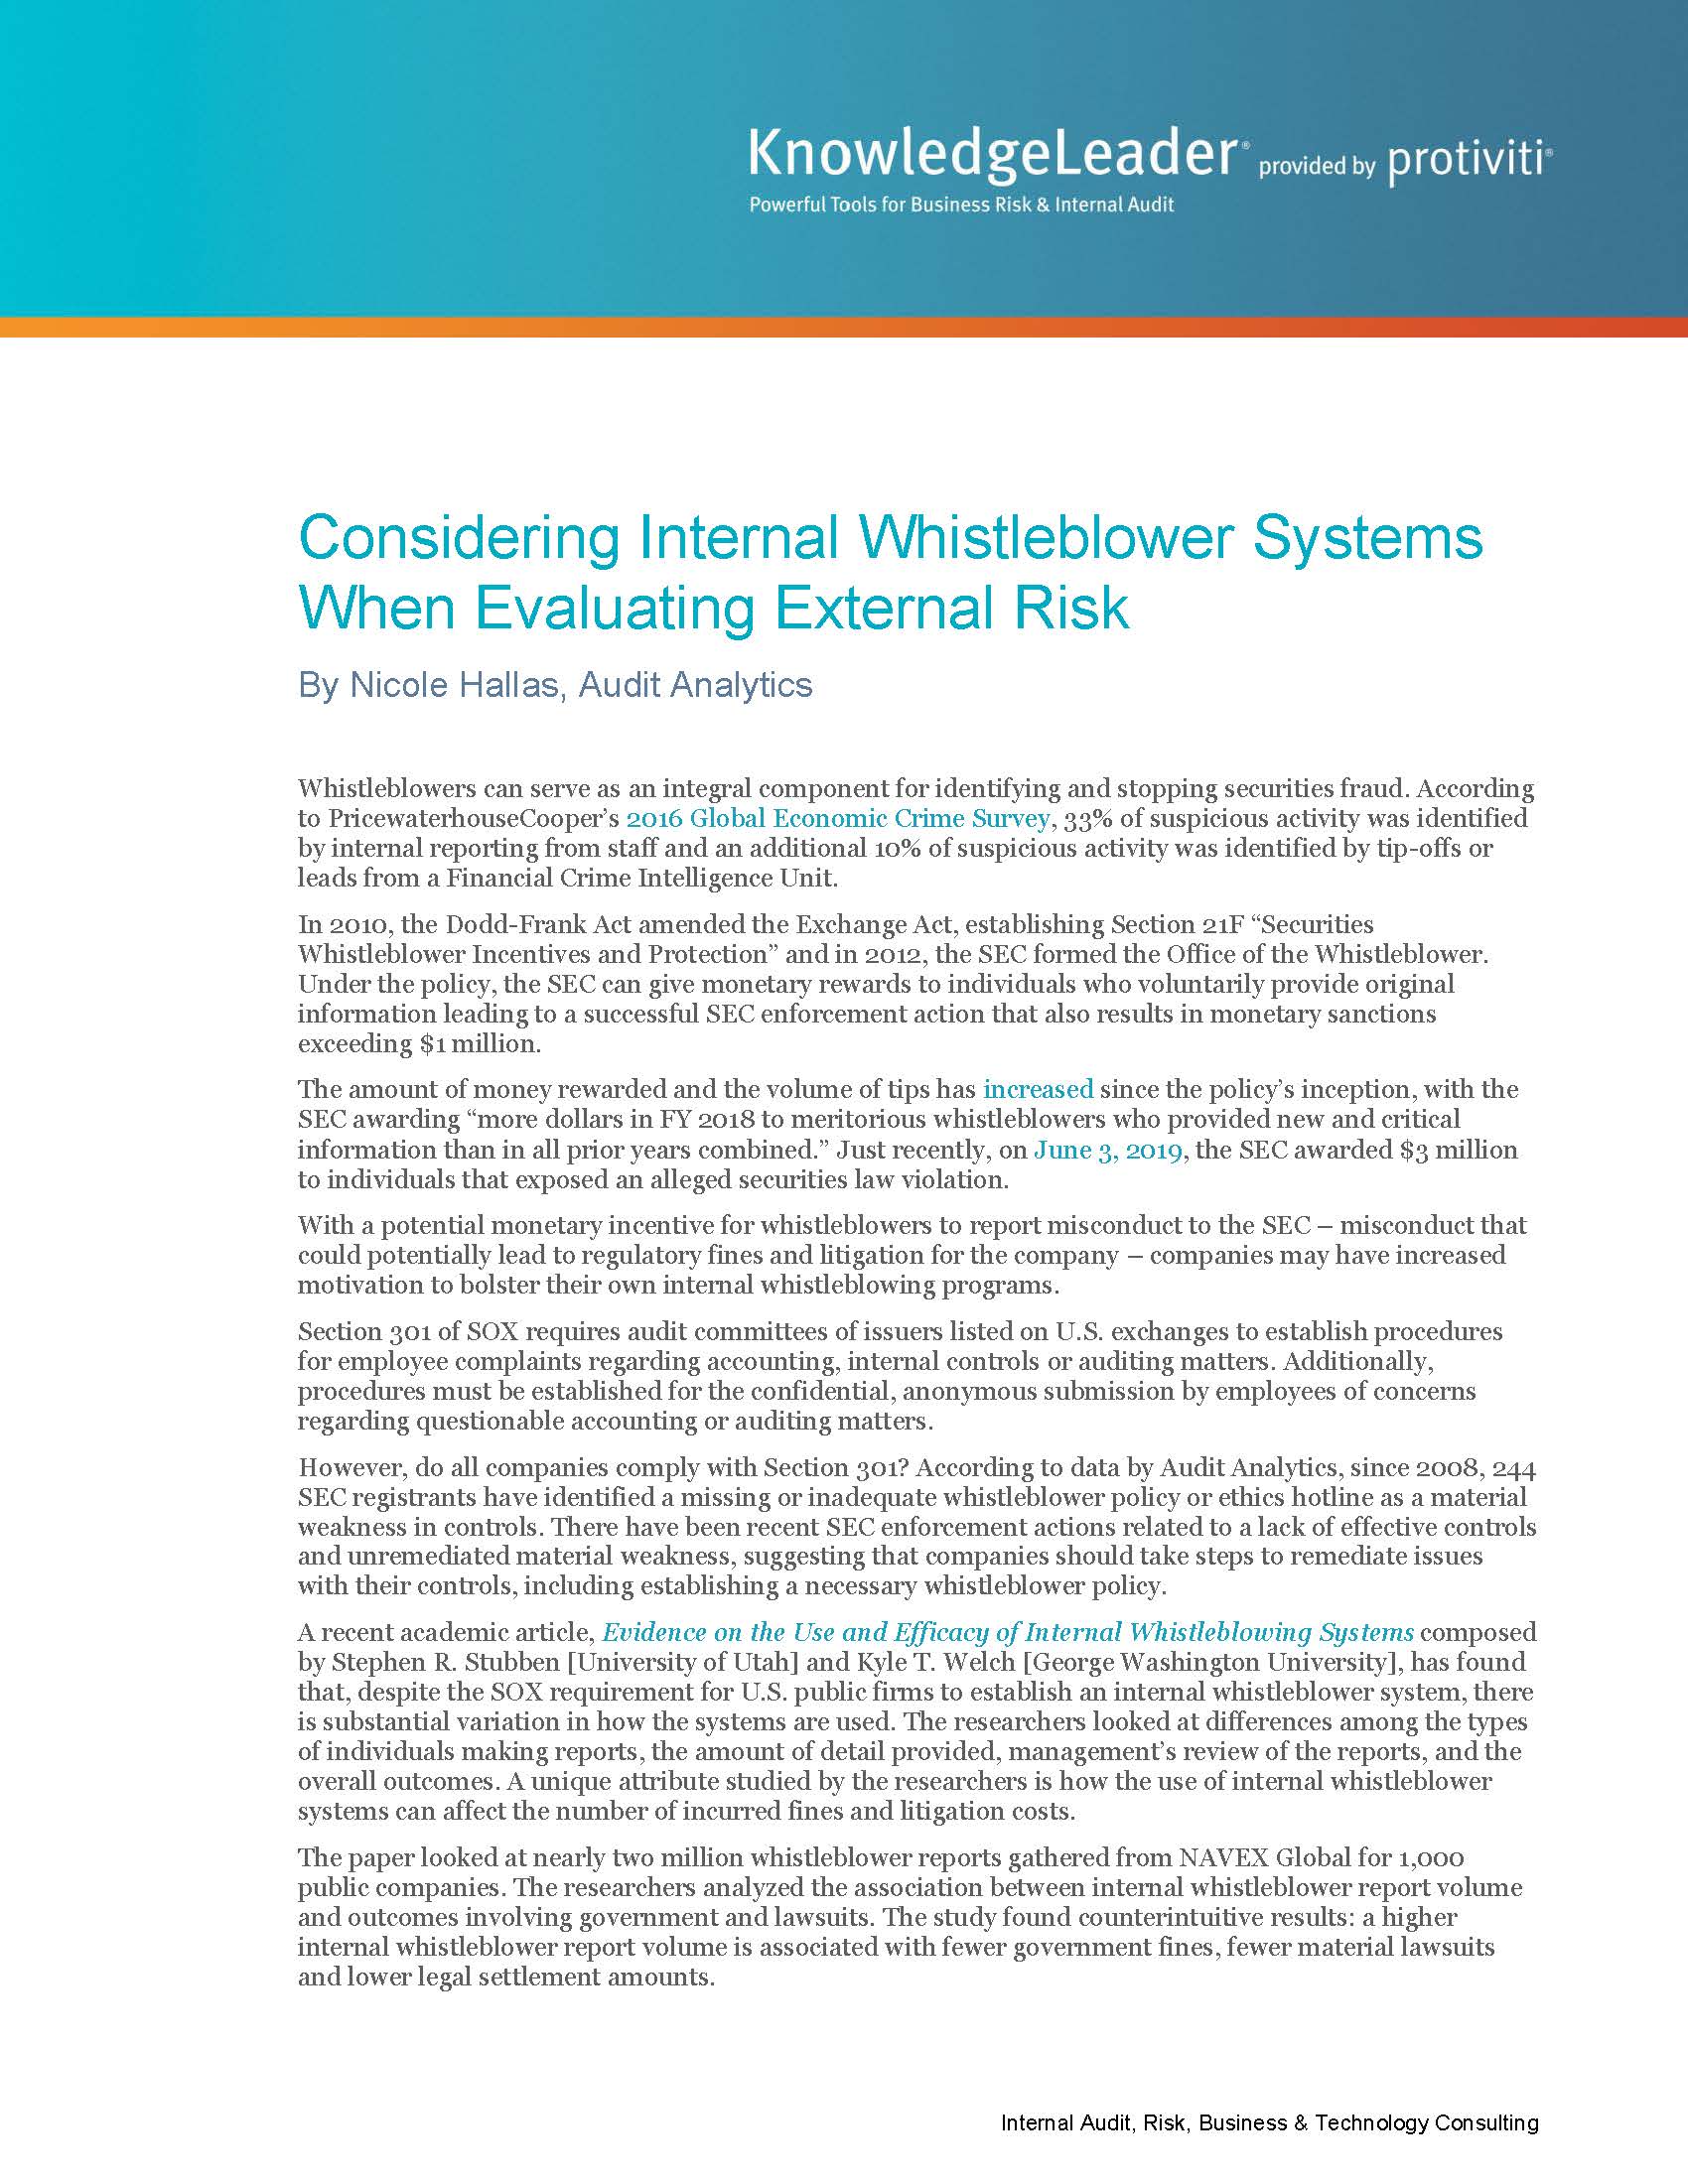 Screenshot of the first page of Considering Internal Whistleblower Systems When Evaluating External Risk